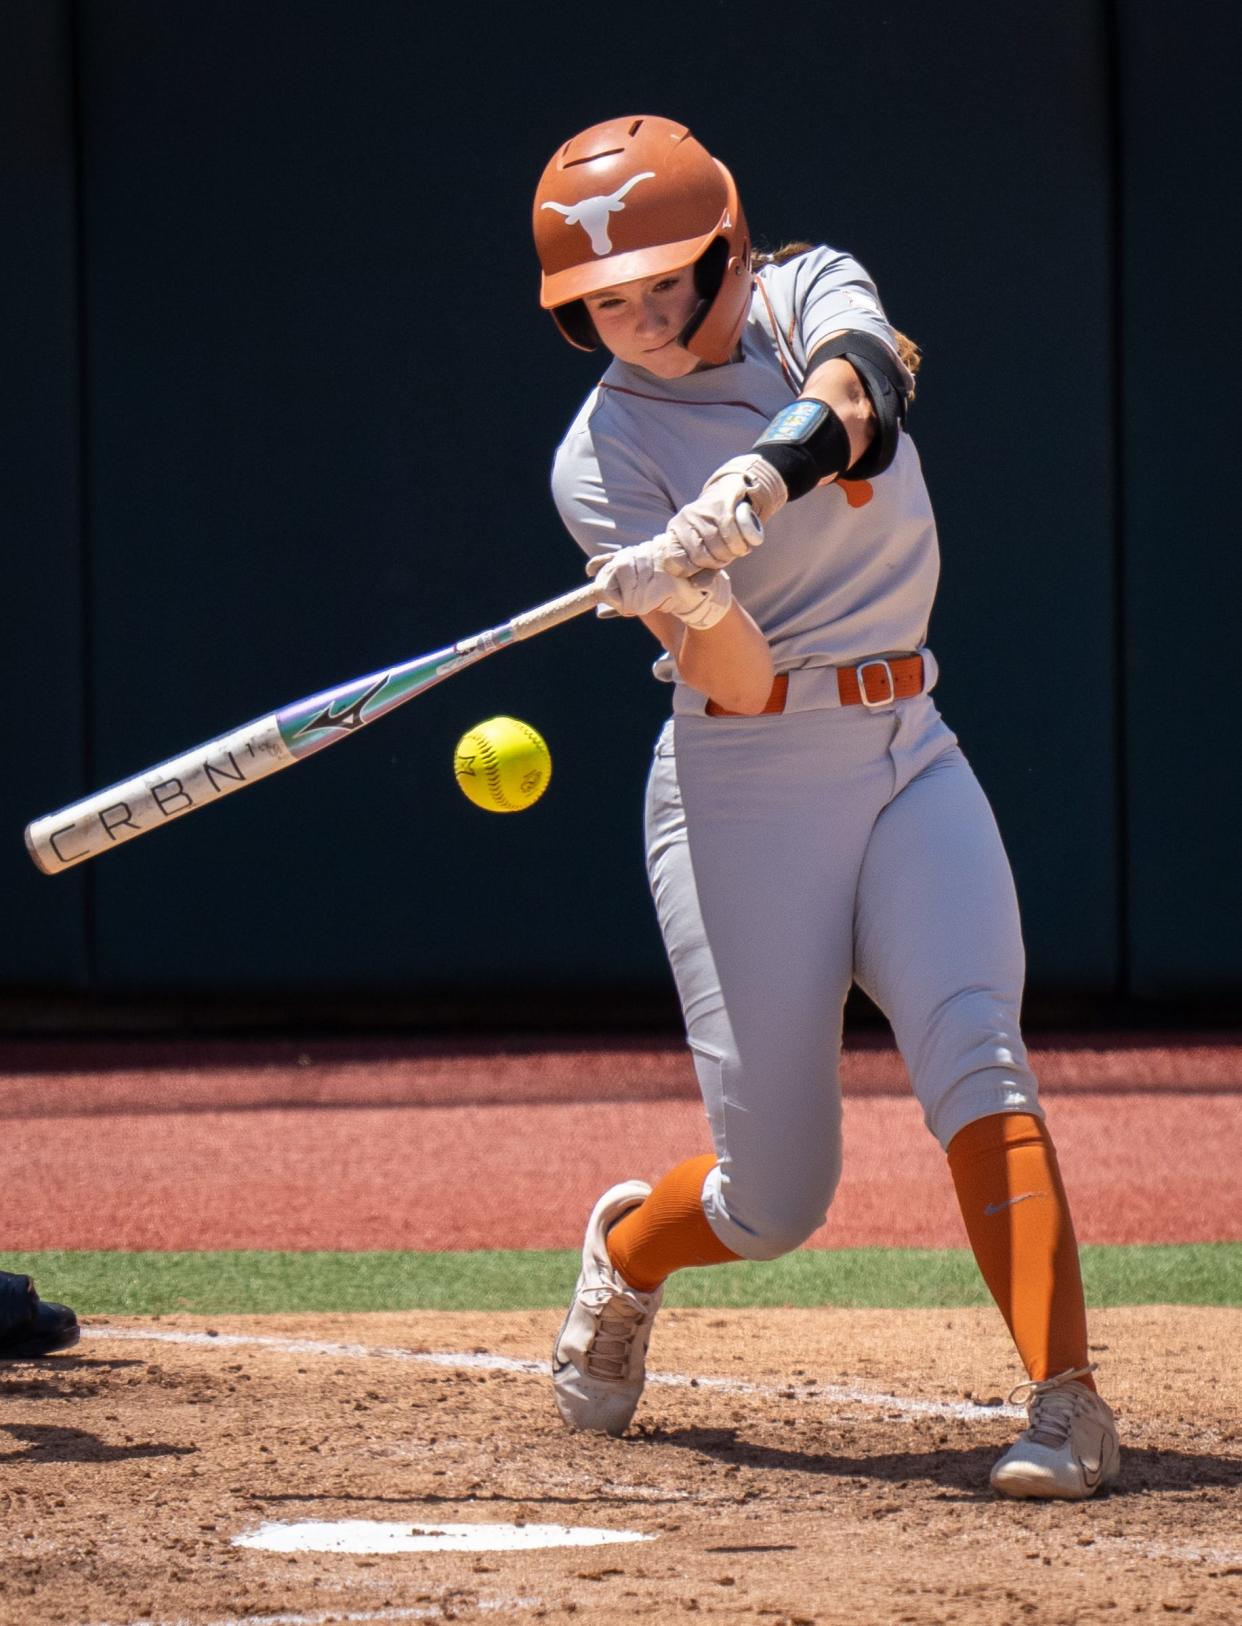 Texas infielder Leighann Goode, an all-Big 12 player as a freshman, says the Longhorns "sat down as a team (after the Baylor series) and talked about playing together as a team and staying together as a team. It’s about everyone supporting each other." Texas opens the Big 12 Tournament on Thursday against Texas Tech.